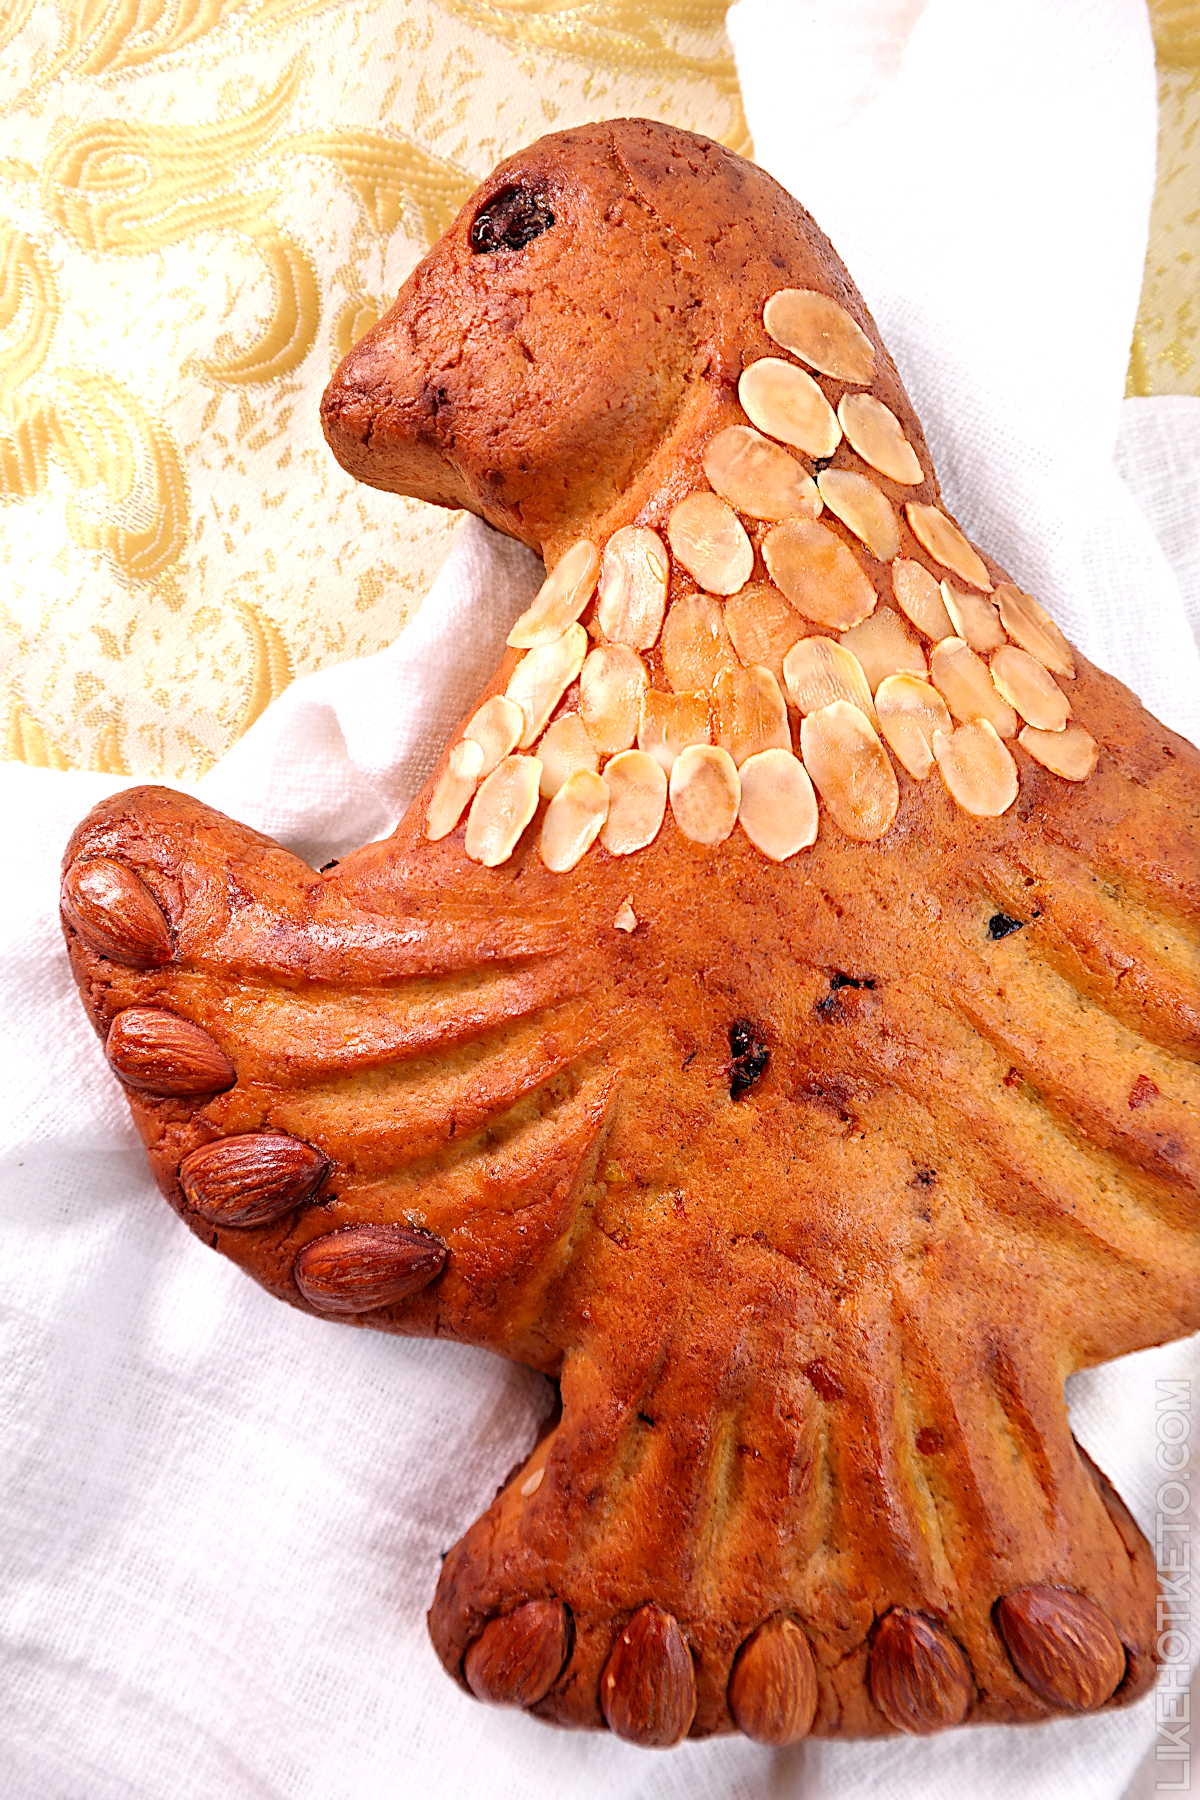 Keto and gluten-free Italian colomba sweet Easter bread, in the shape of a dove.